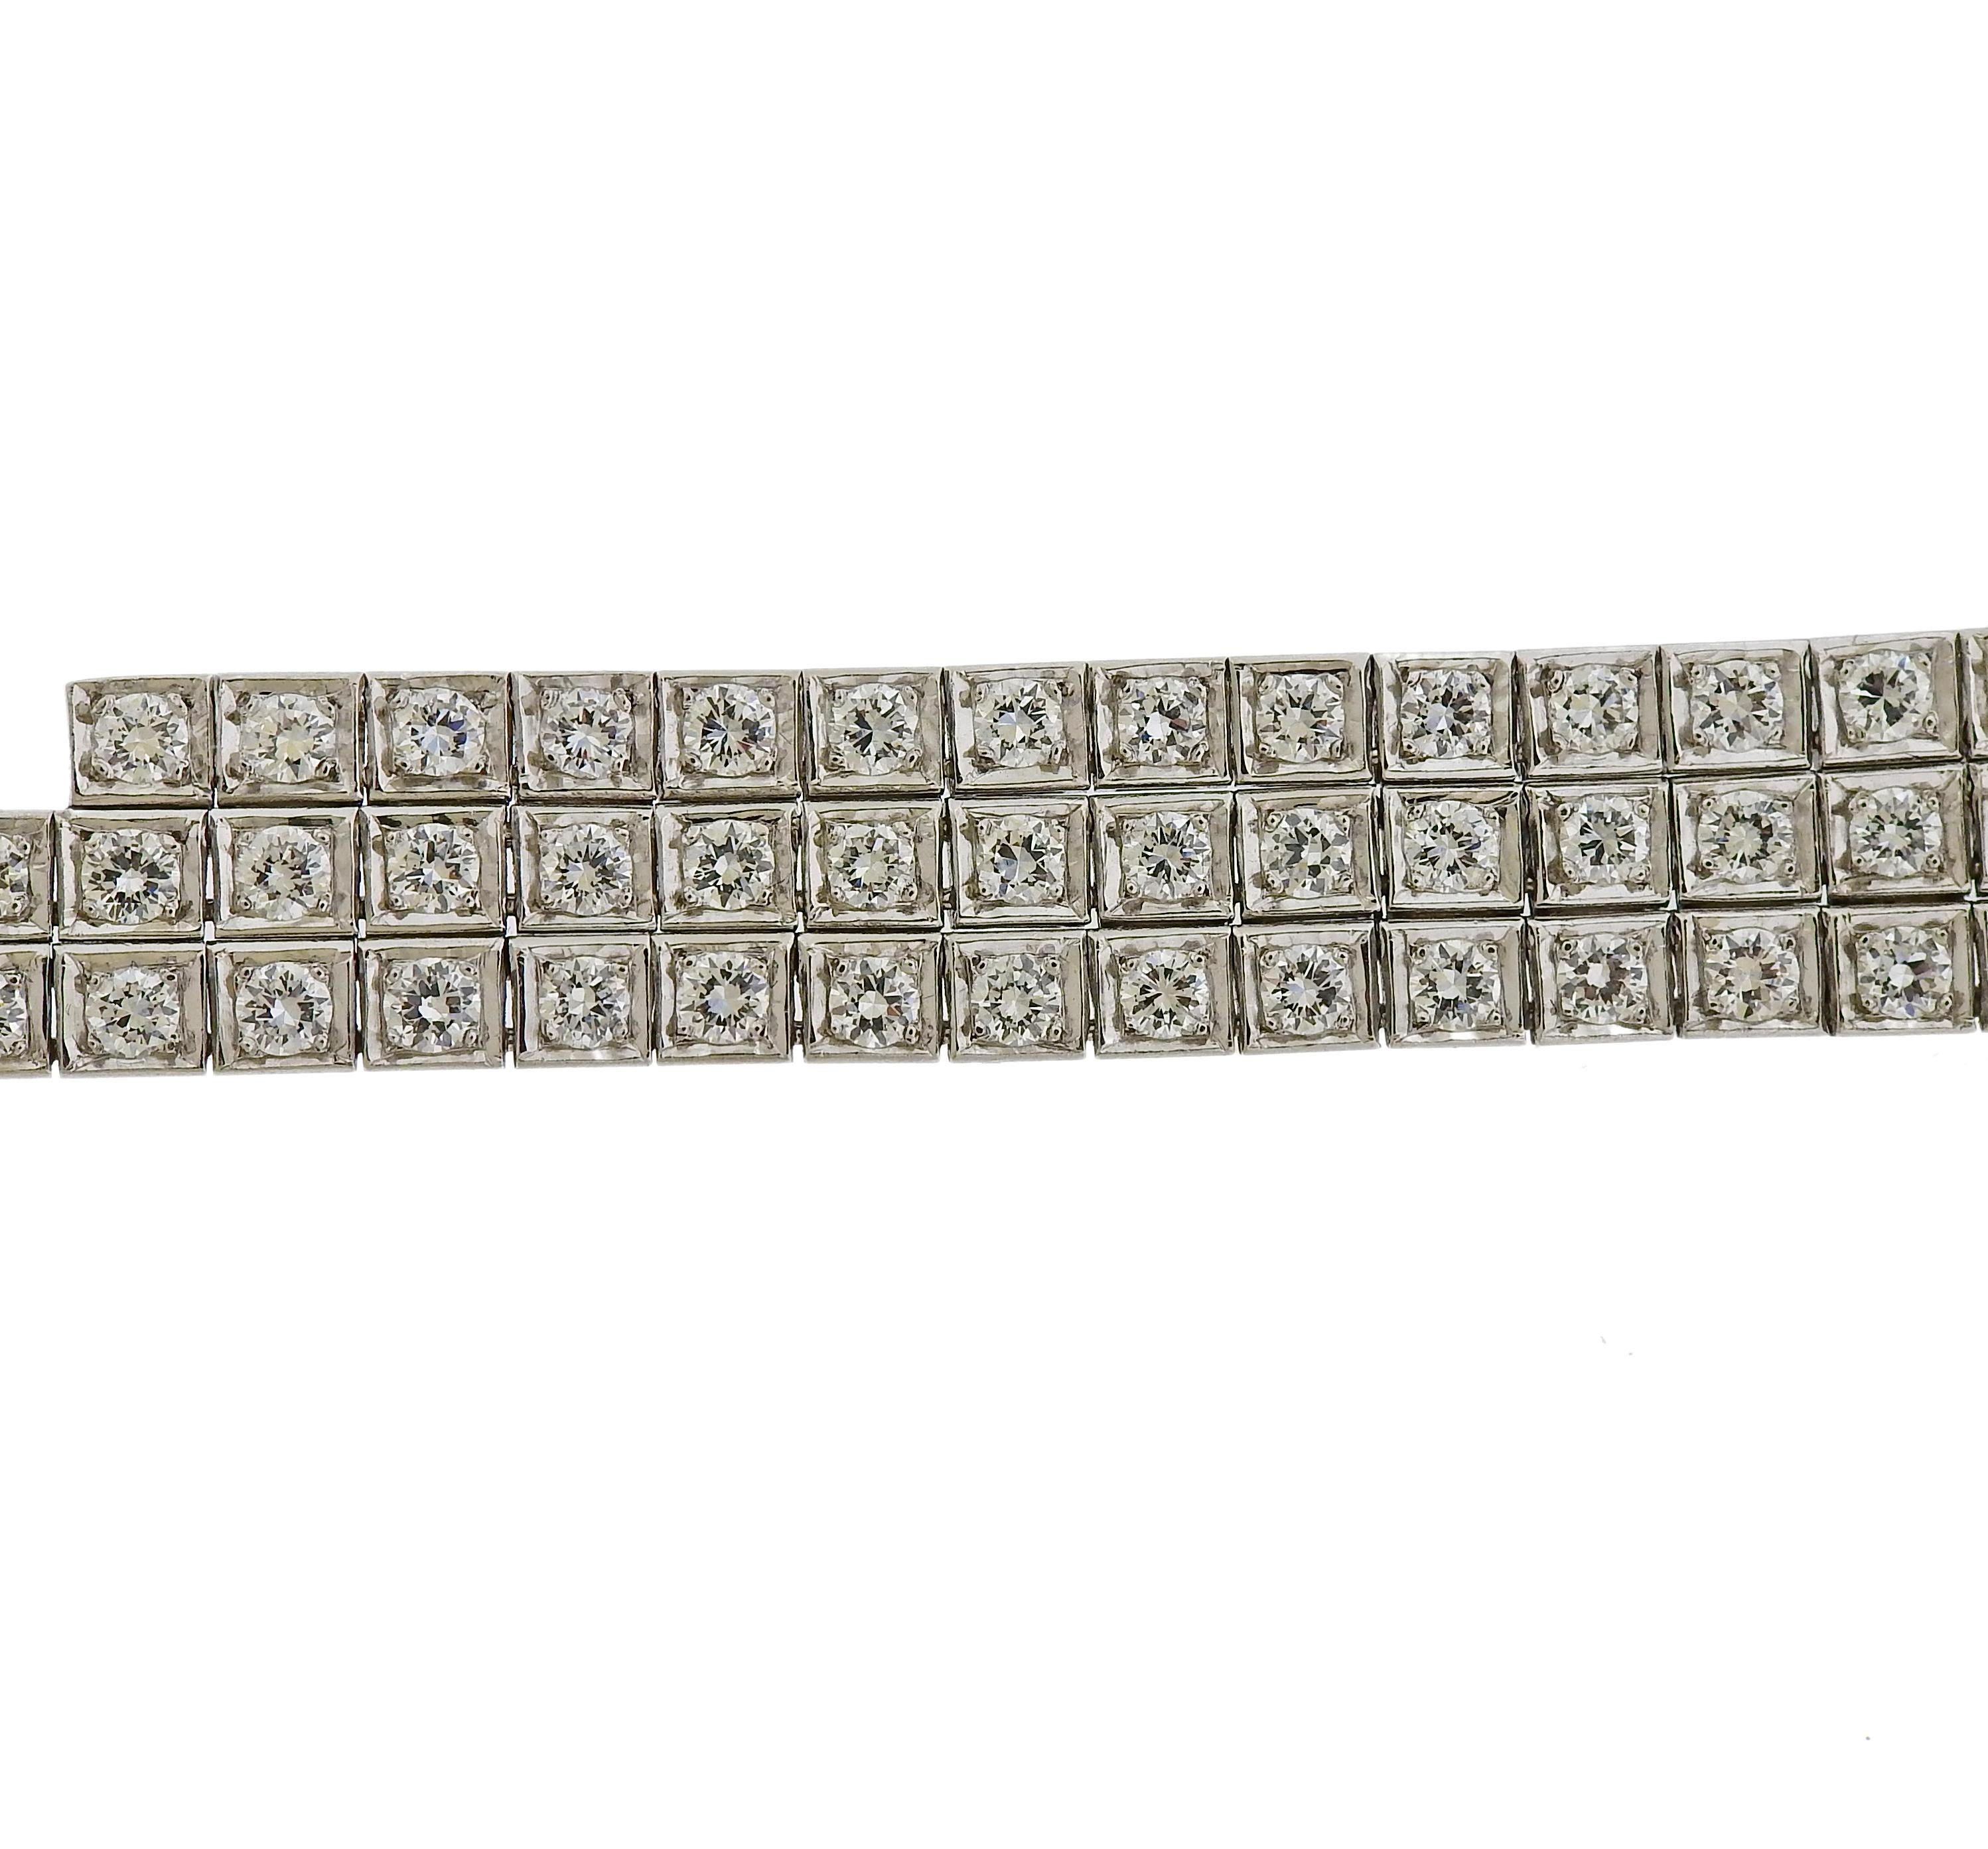 18k white gold bracelet, set with approx. 6 carats  in diamonds. The bracelet is 6